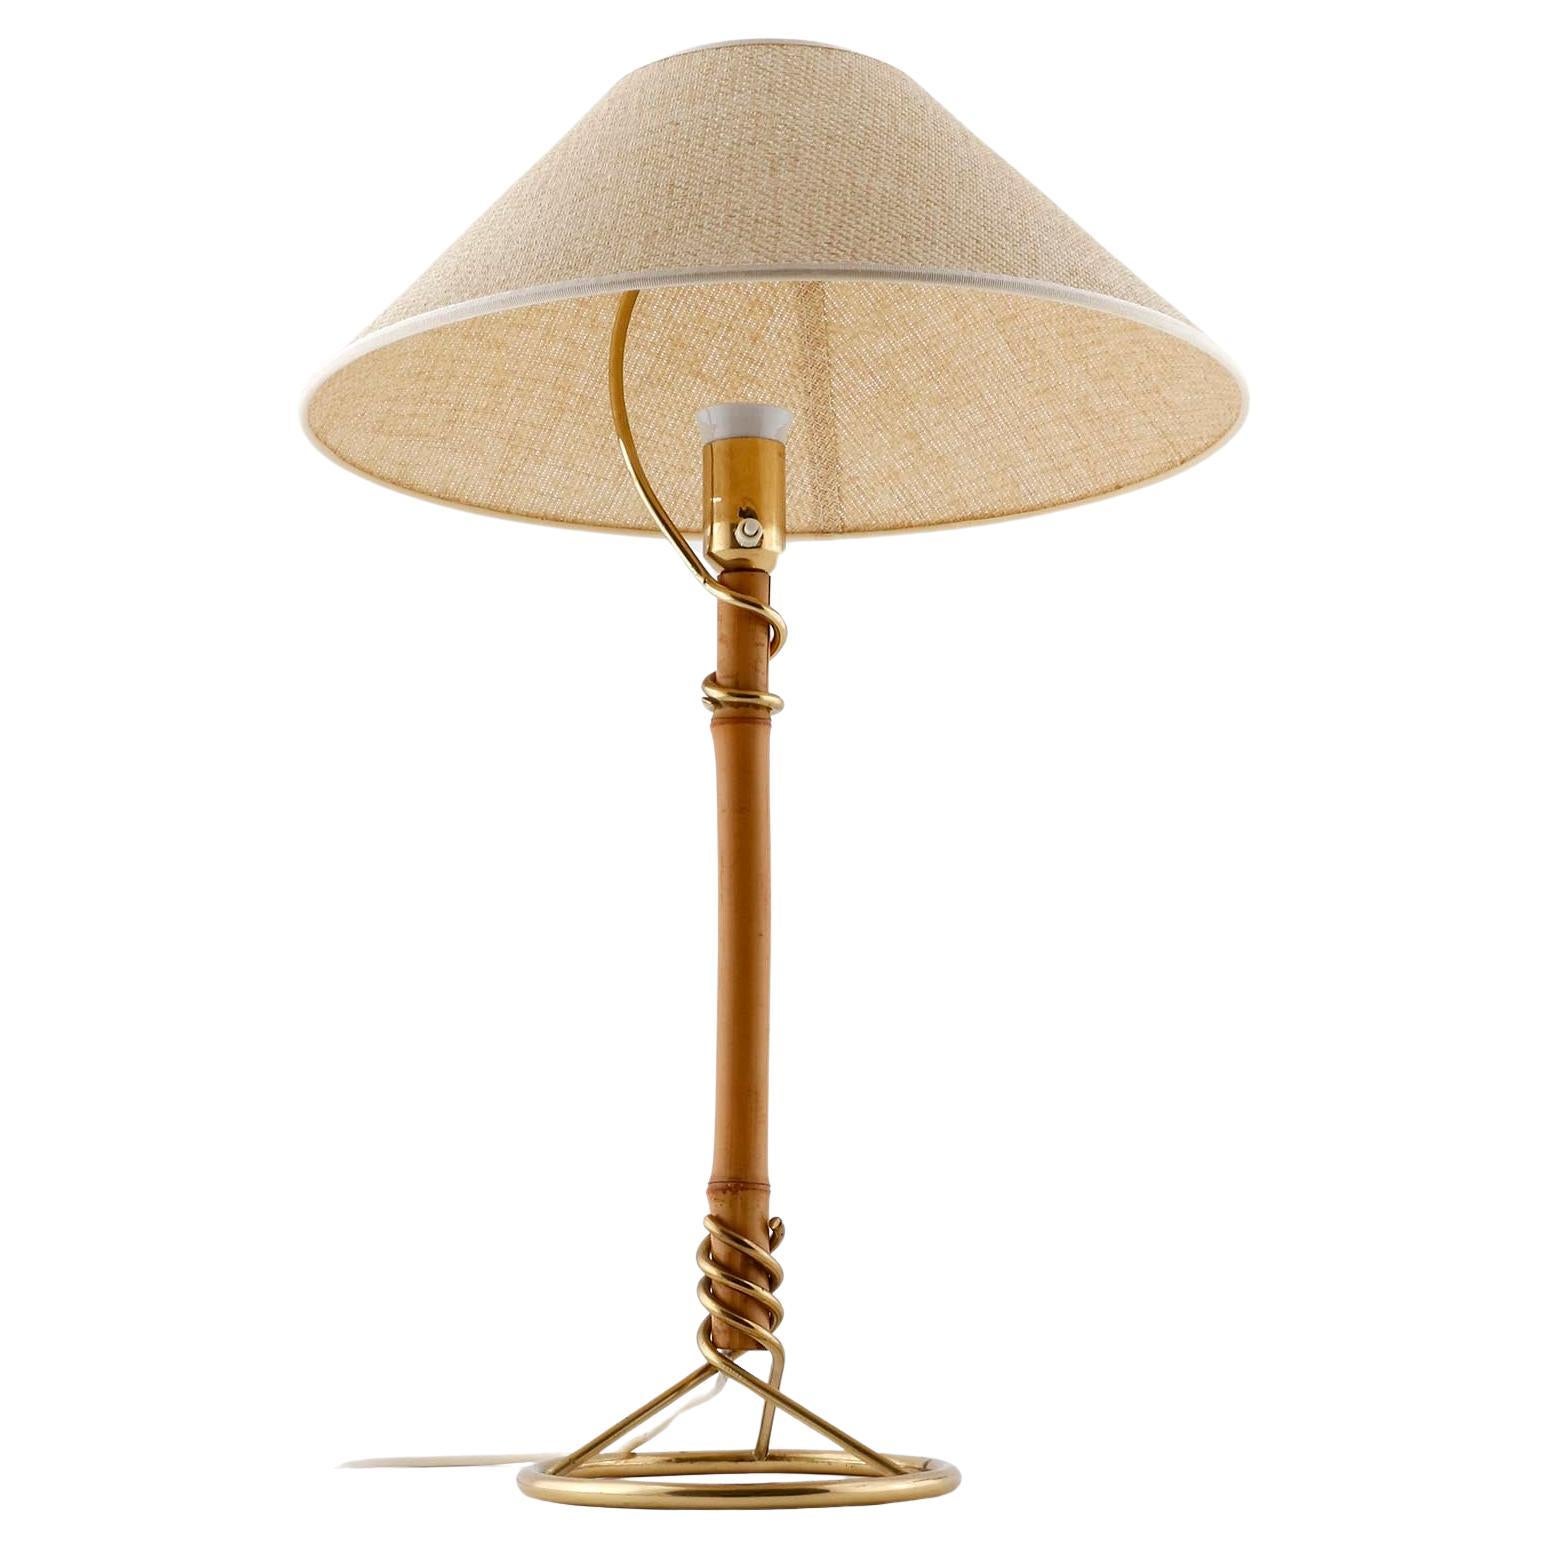 Mid-Century Modern Large Table Lamp, Brass Bamboo Cane Wicker Shade, attr. J.T. Kalmar, 1950s For Sale